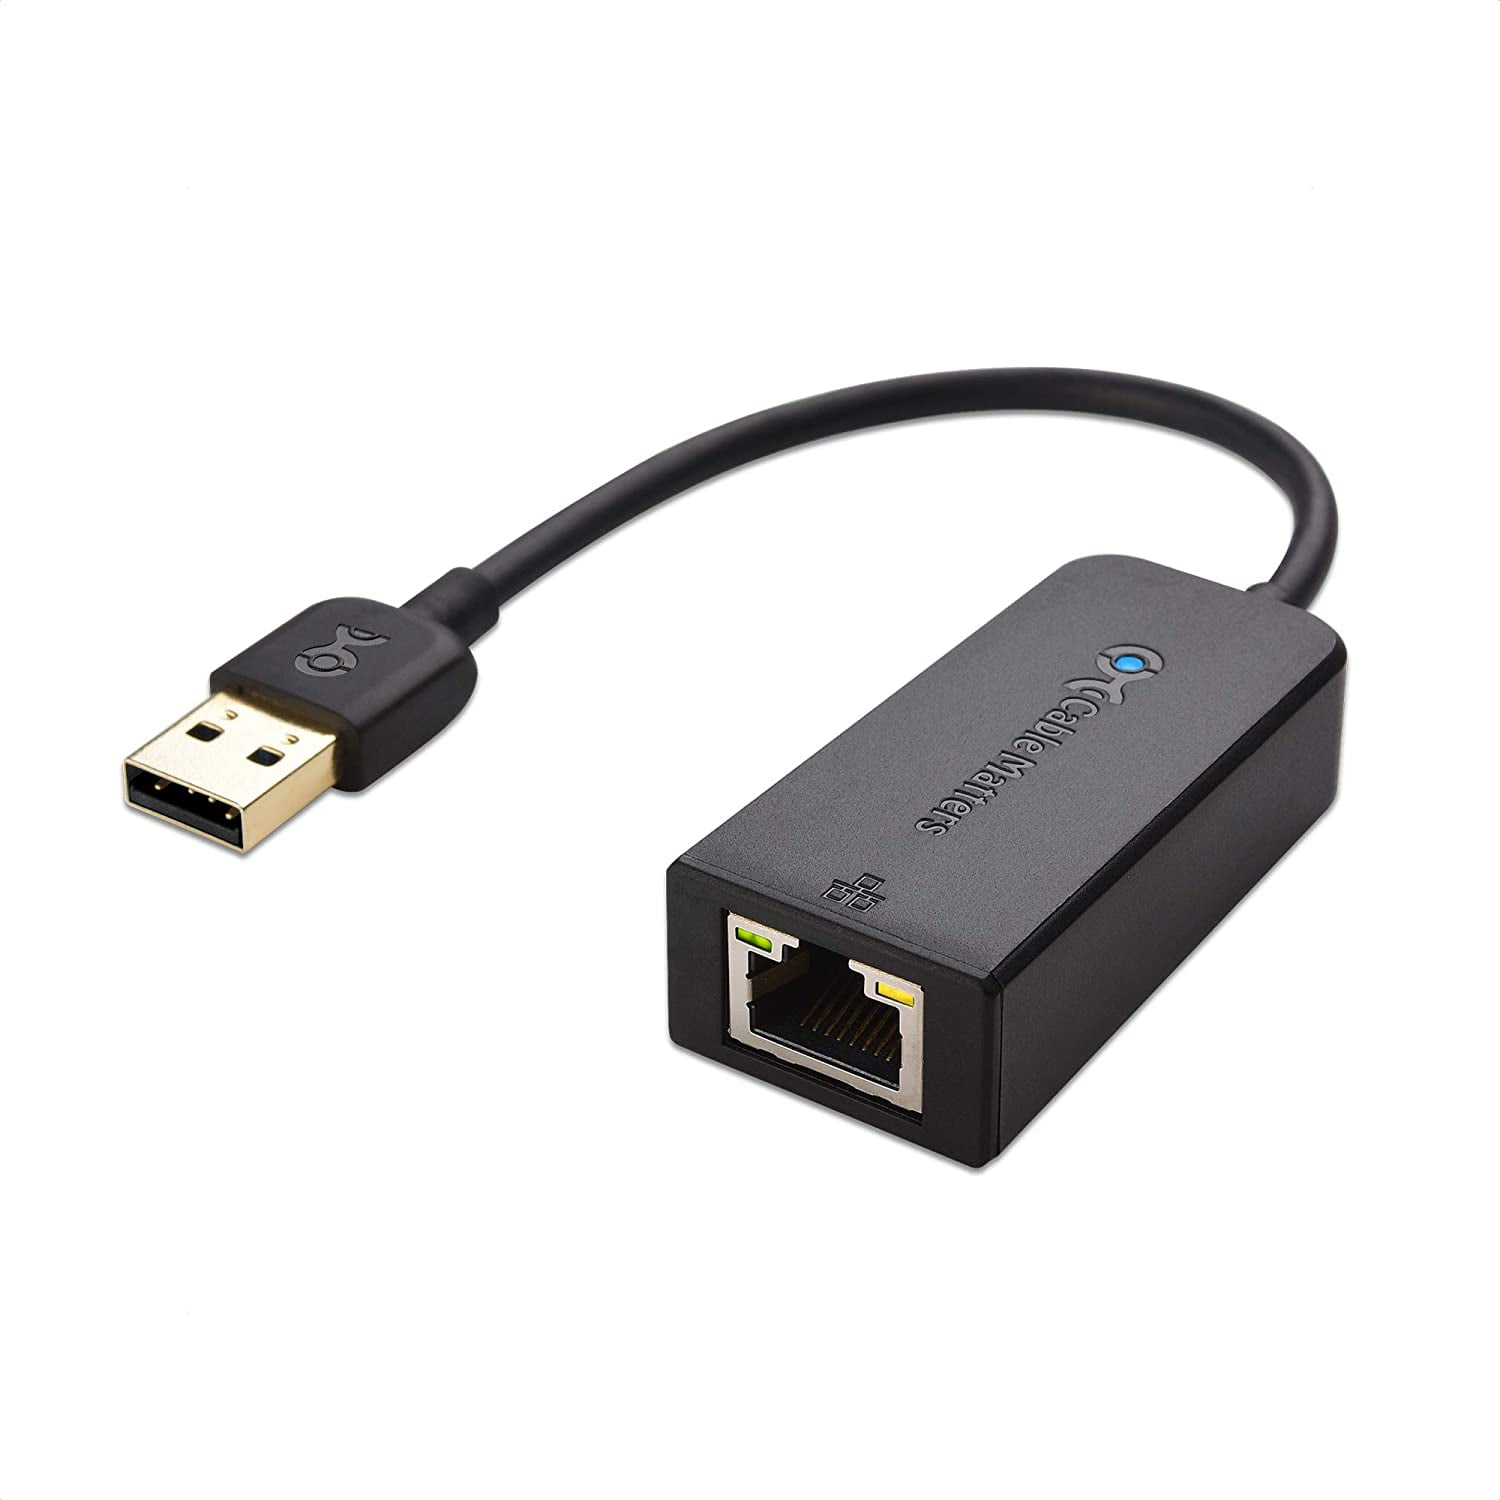 Richer-R USB to RJ45 Adapter,USB 2.0 To RJ45 Ethernet Extension Extender Network Adapter Cable Wired Lan Ideal Use USB Cameras,Printers,Web Cameras,Keyboard,Mouse Extensions